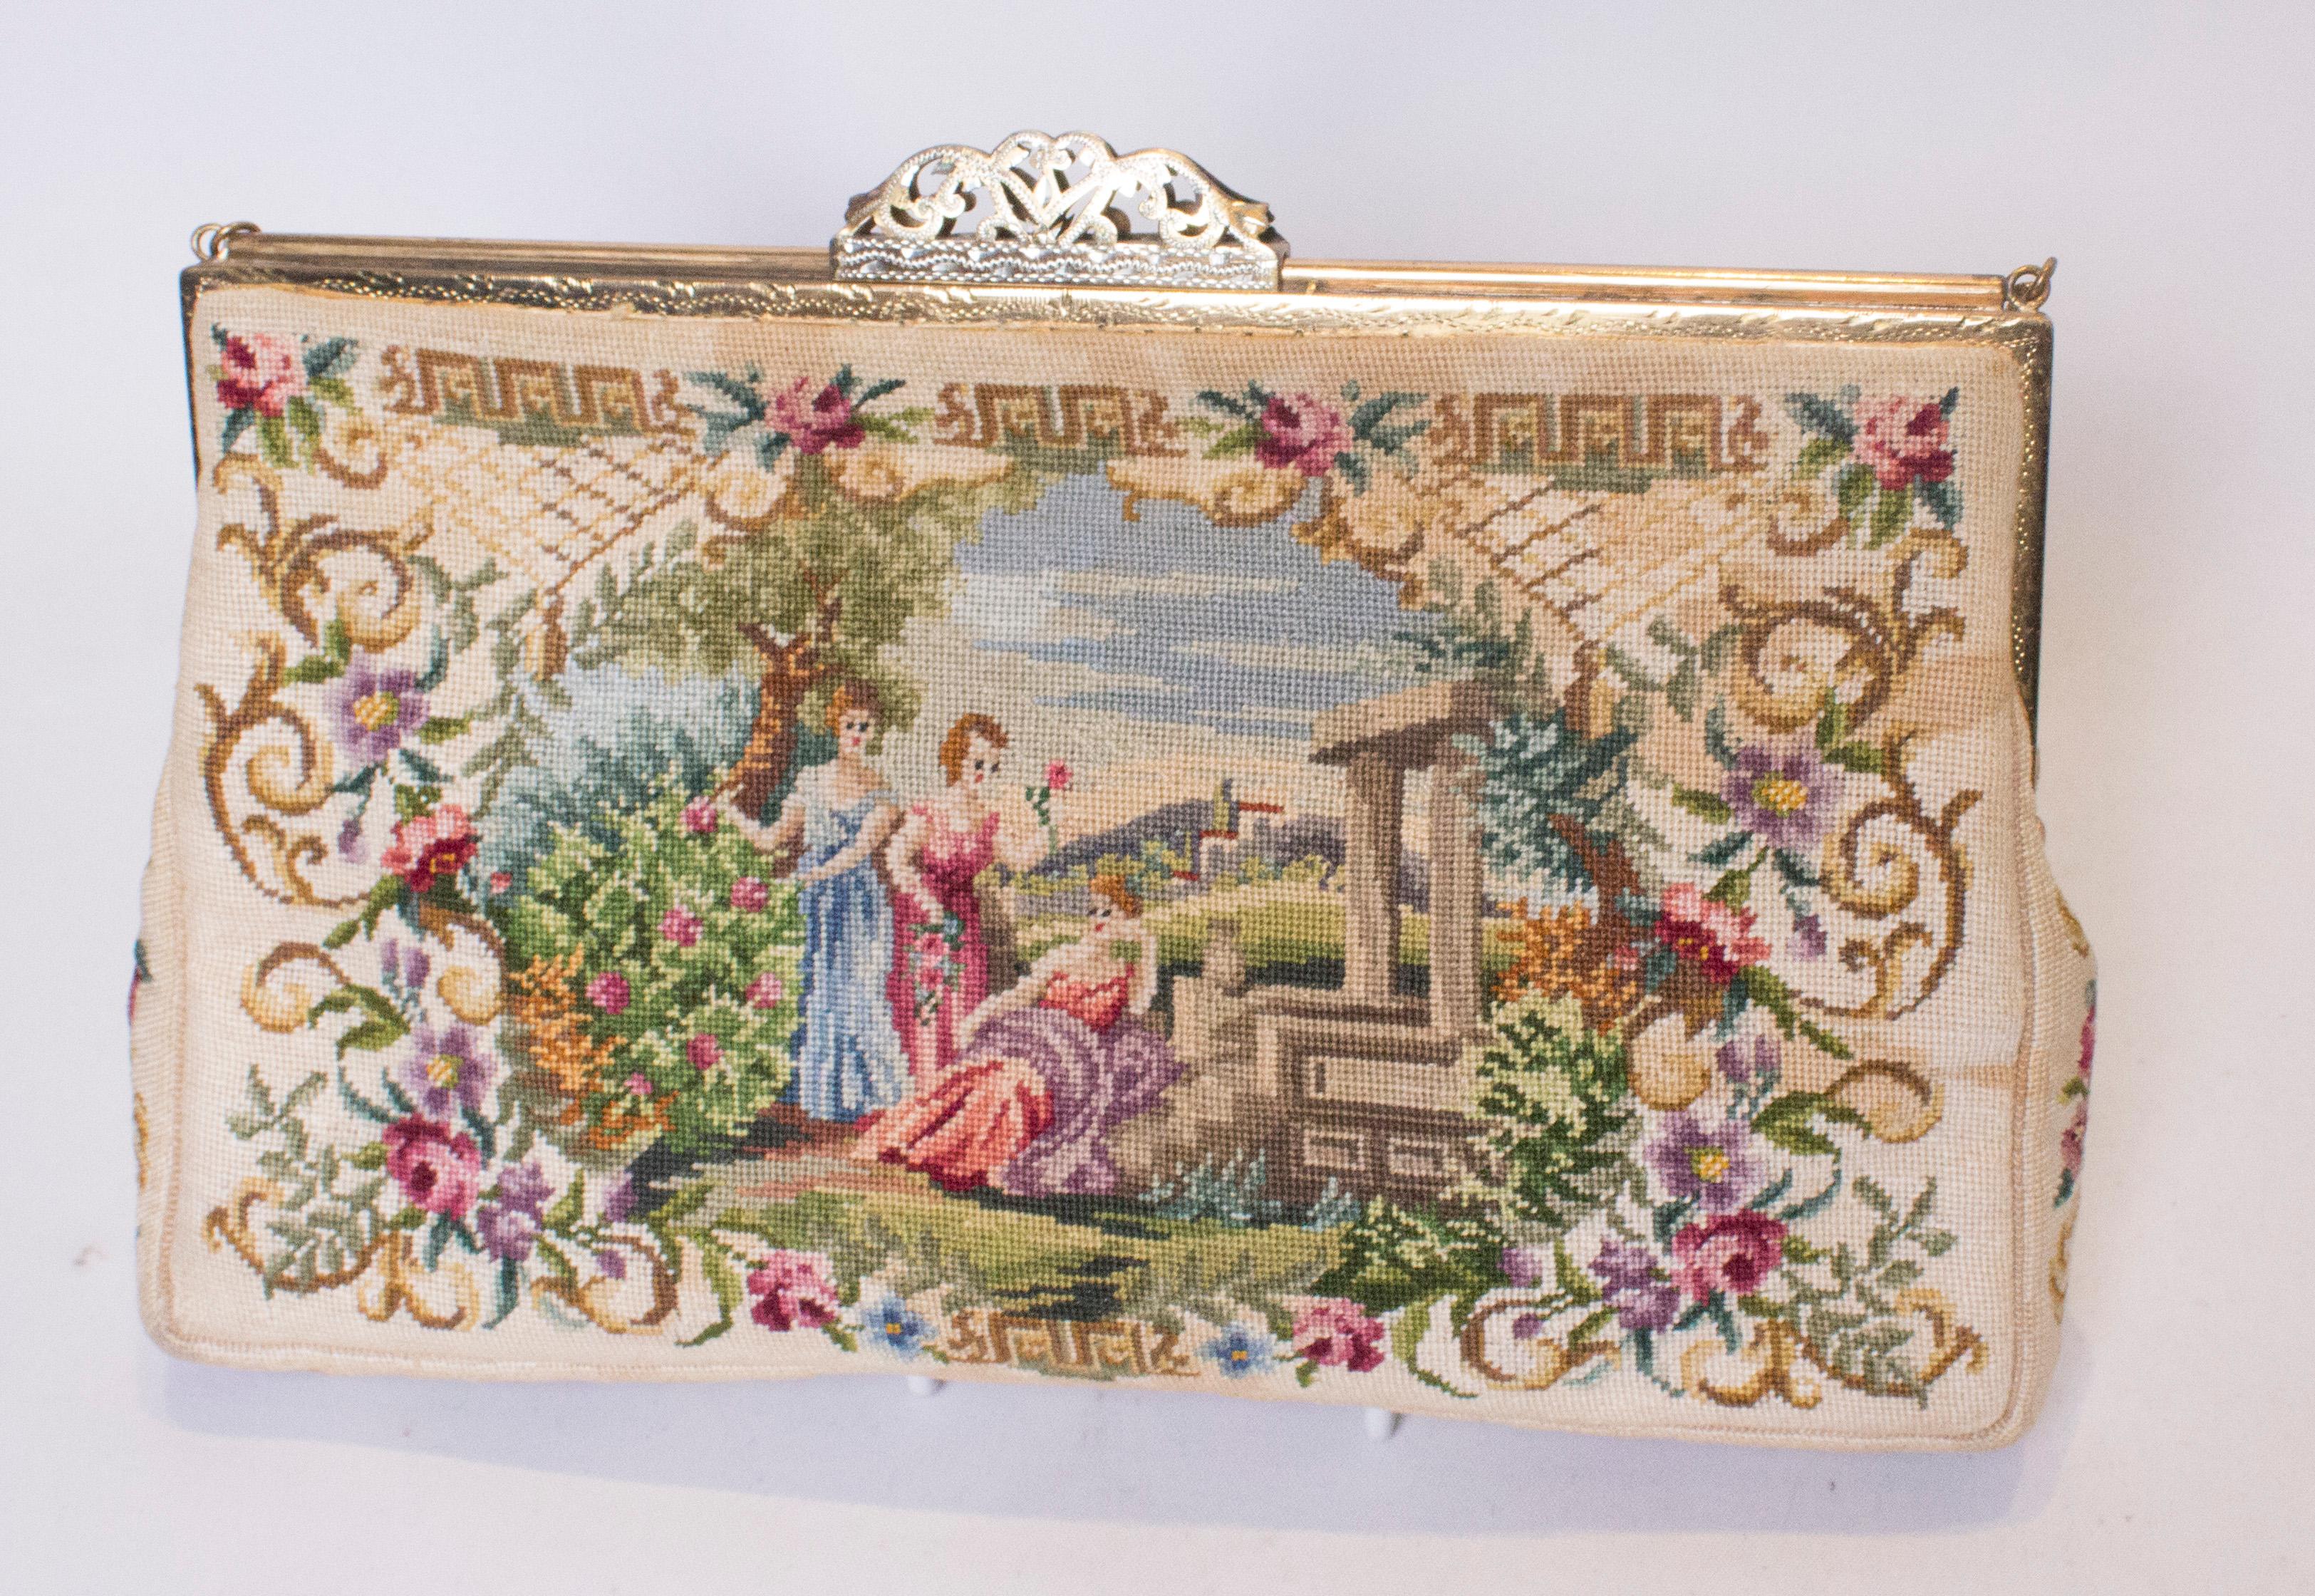 A sizeable vintage handbag with an interesting frame and clasp that has a slide opening. There is an attractive design of reclining ladies on each side. The bag is lined in satin with two pouch pockets.
Measurements: width 9 1 /2'',height 6'',depth